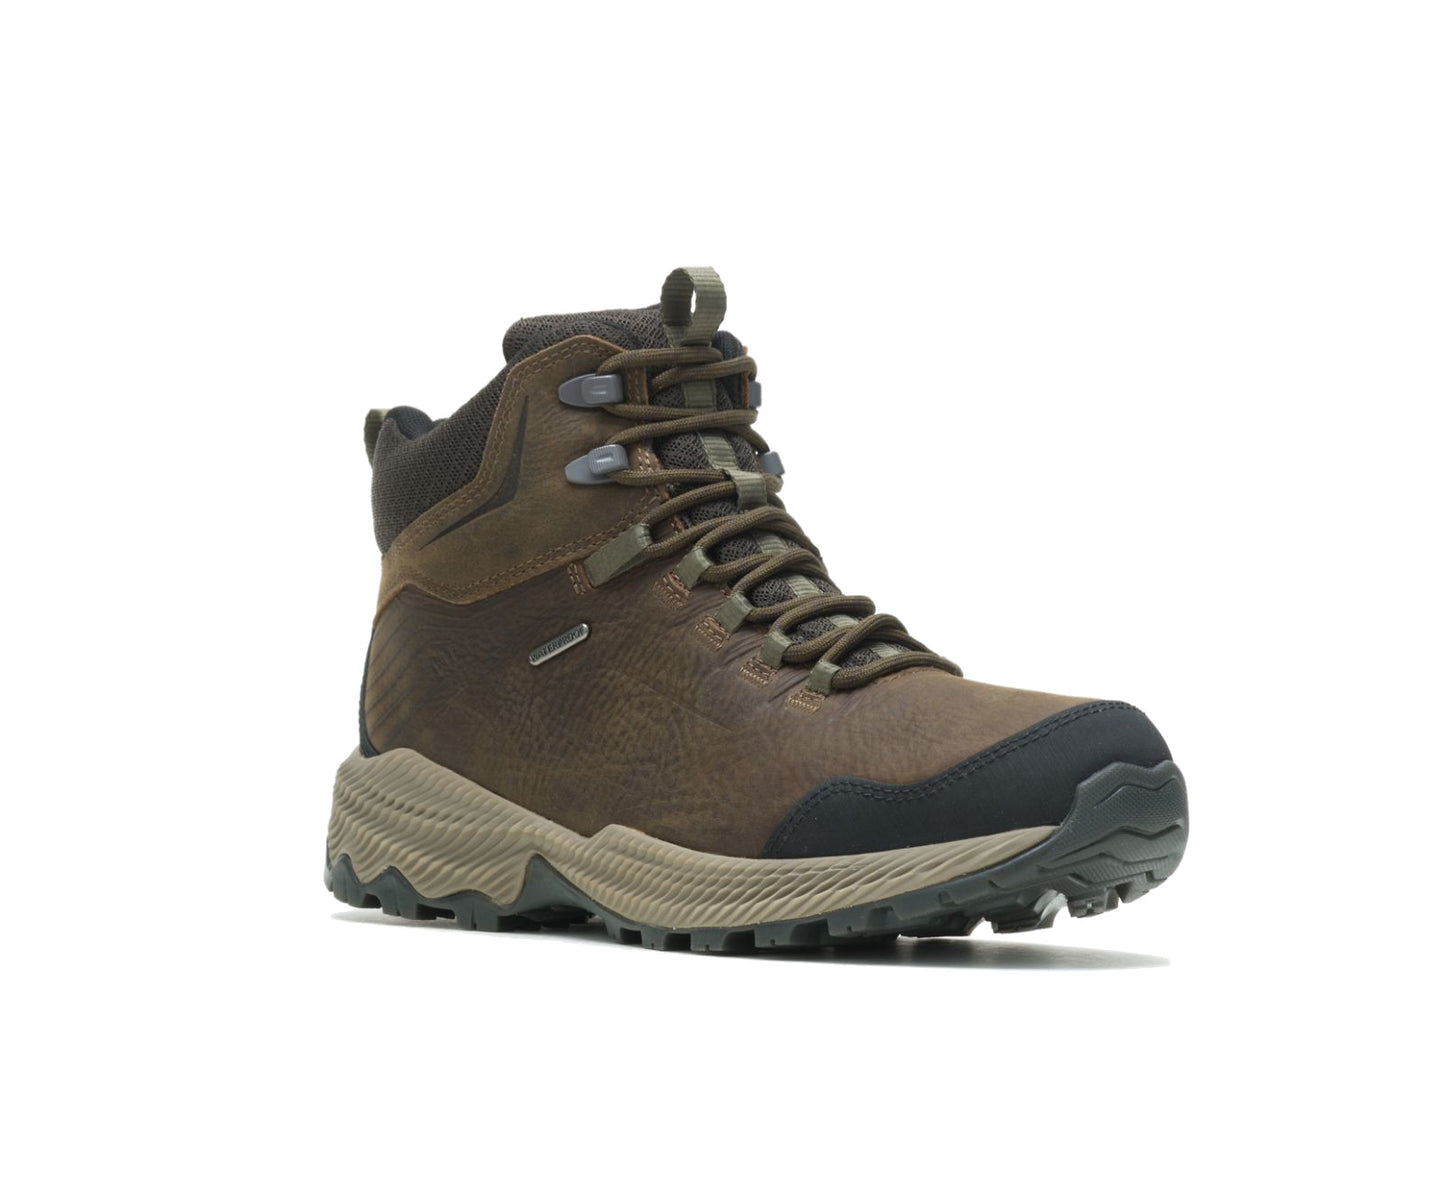 Merrell Men's Forestbound Mid Waterproof - Cloudy